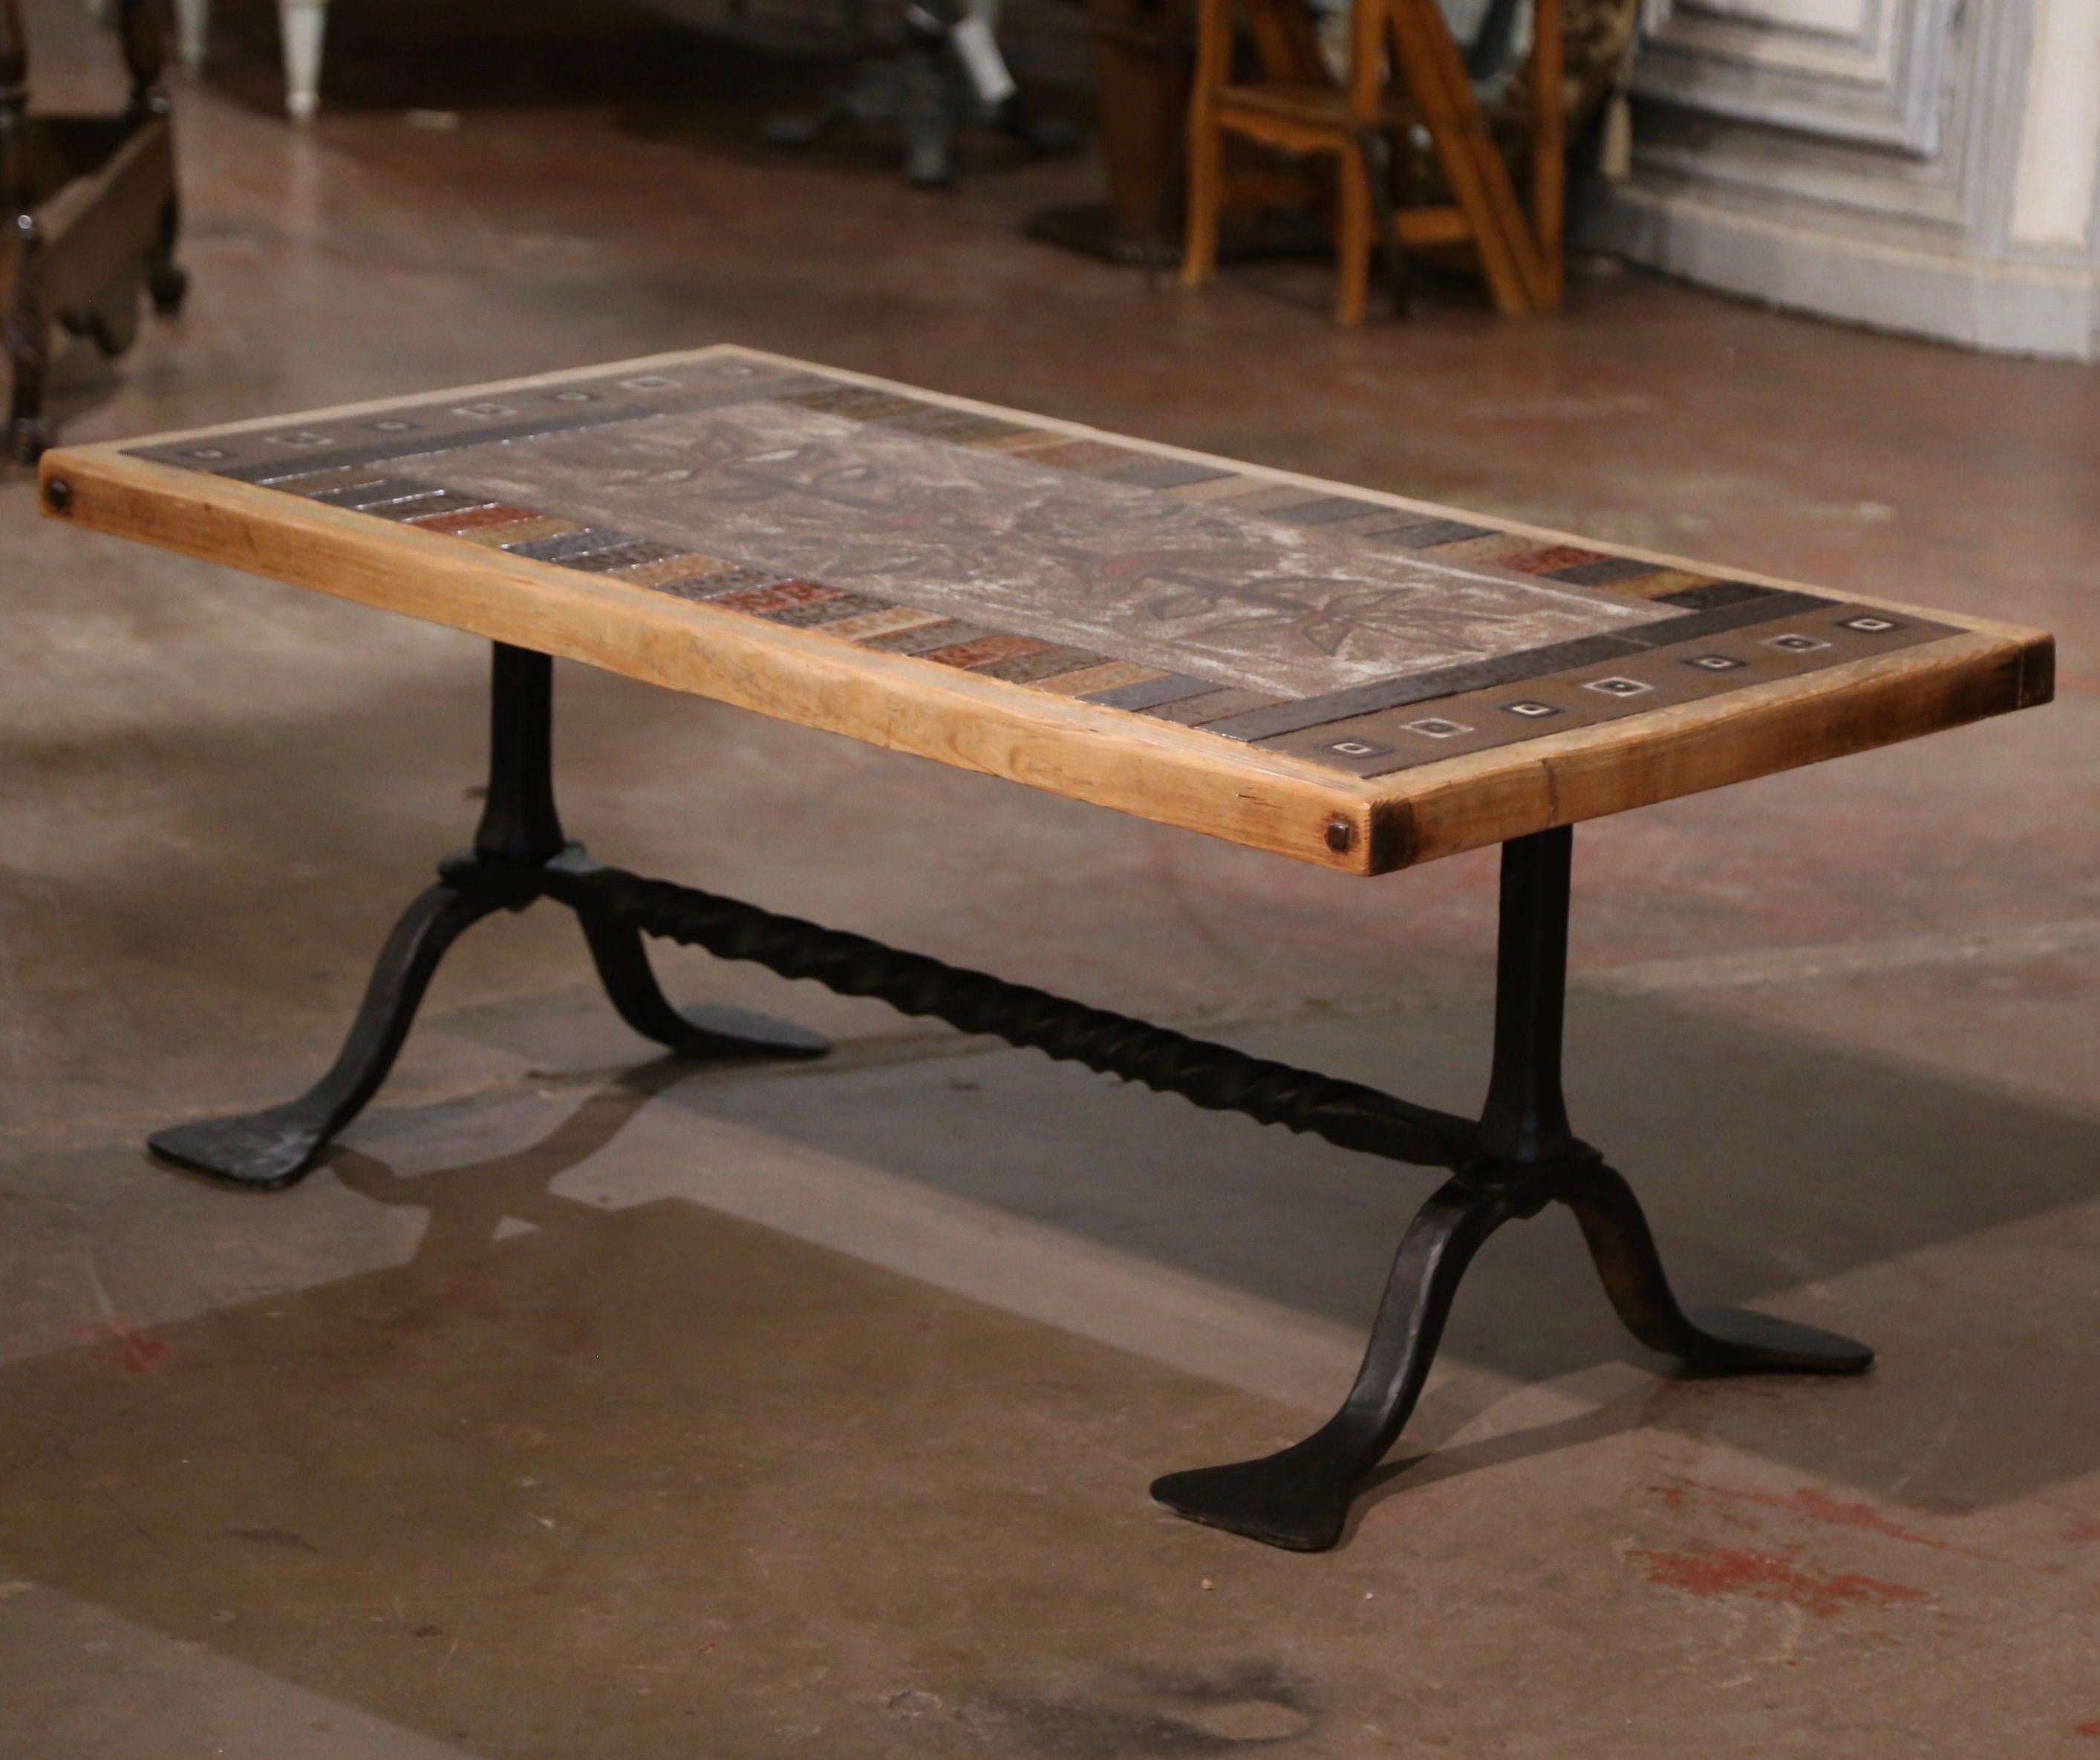 20th Century Mid-Century French Oak Ceramic and Wrought Iron Coffee Table Signed J.G. Picard For Sale